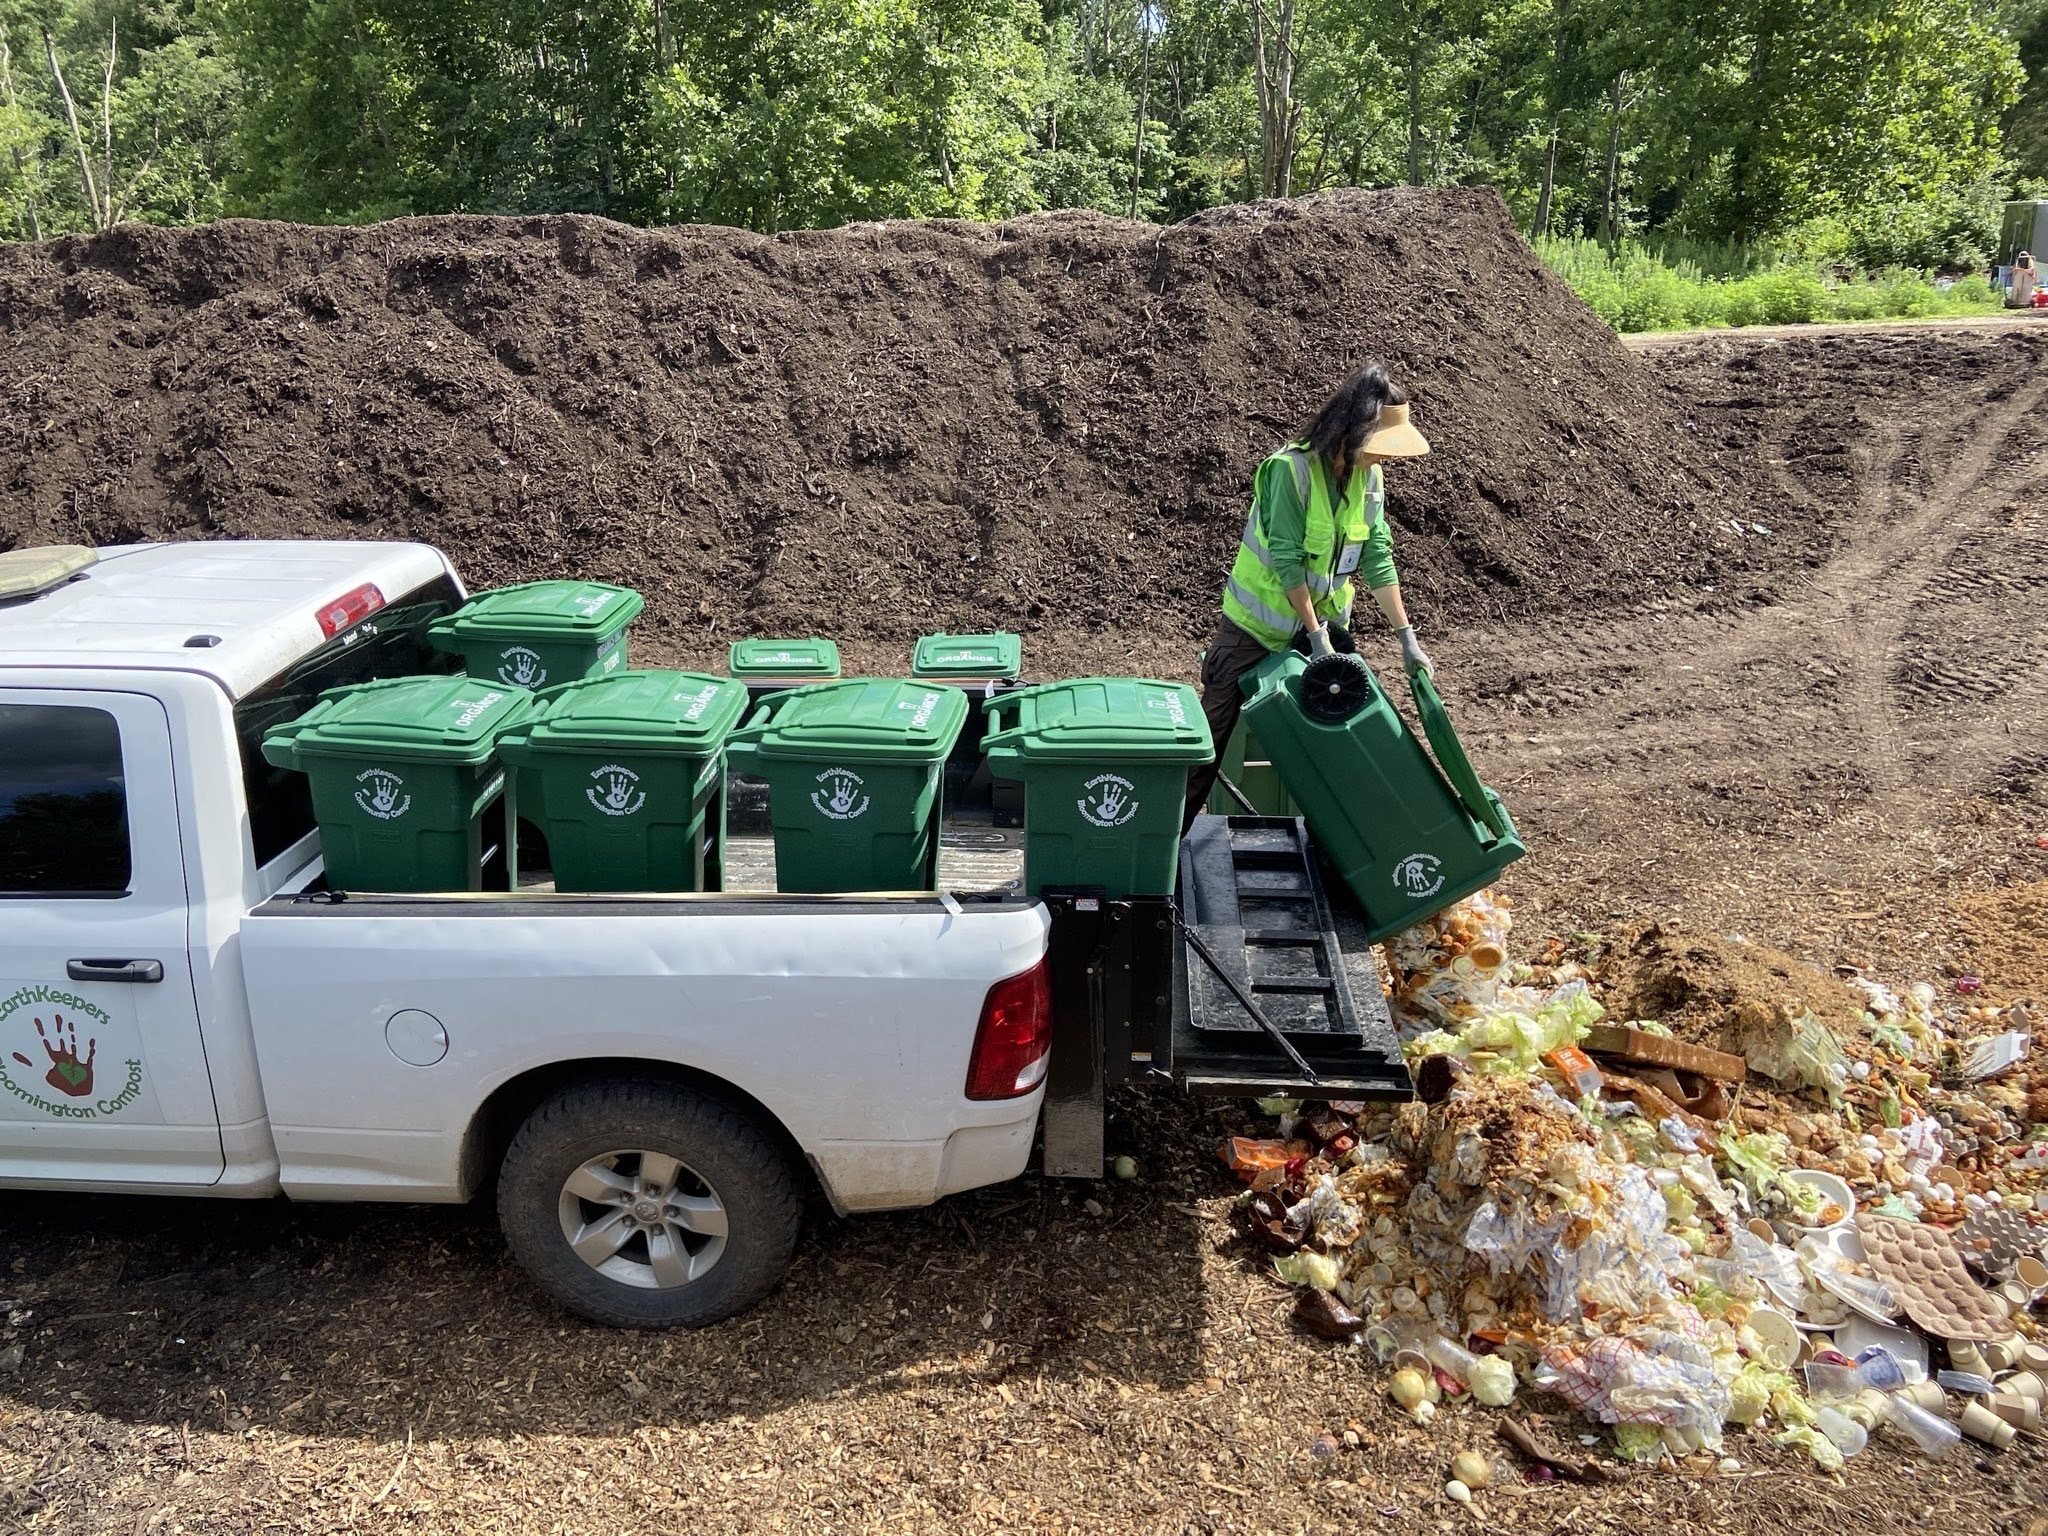 EarthKeepers Staff emptying a compost bin on a large pile of compost at their facility